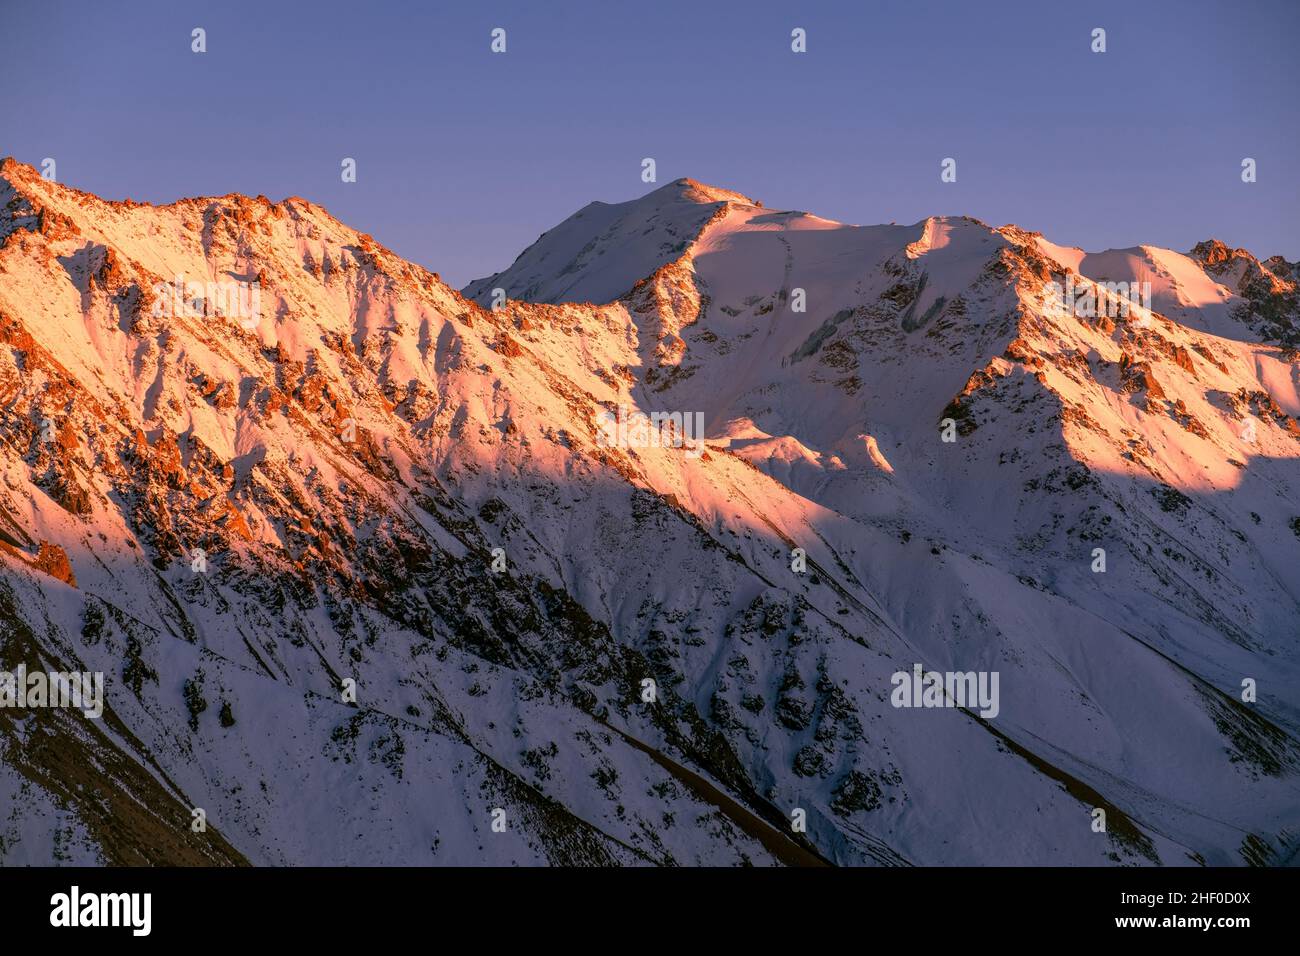 Soft evening sunlight on mountain ridges; rocky mountains covered with snow at sunset Stock Photo